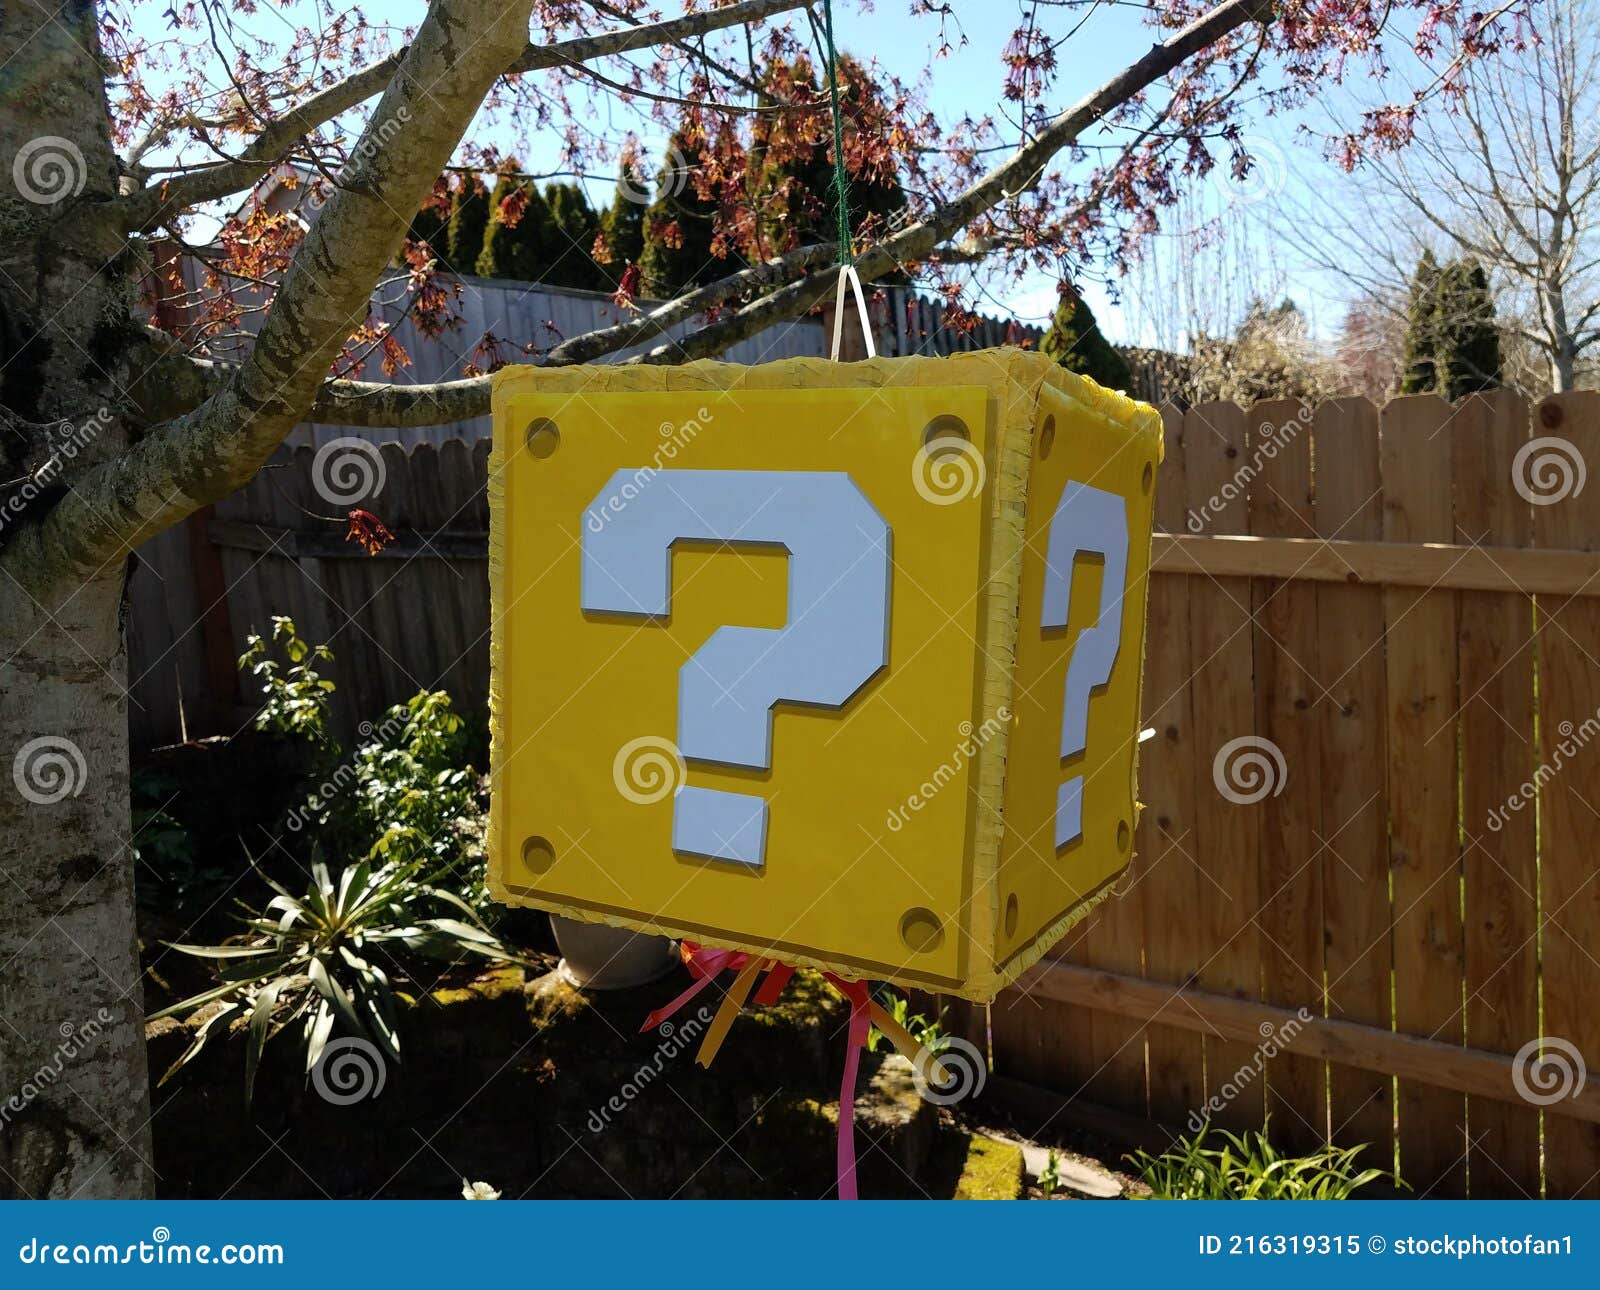 Yellow Question Mark Block Pinata Hanging from Tree Stock Image